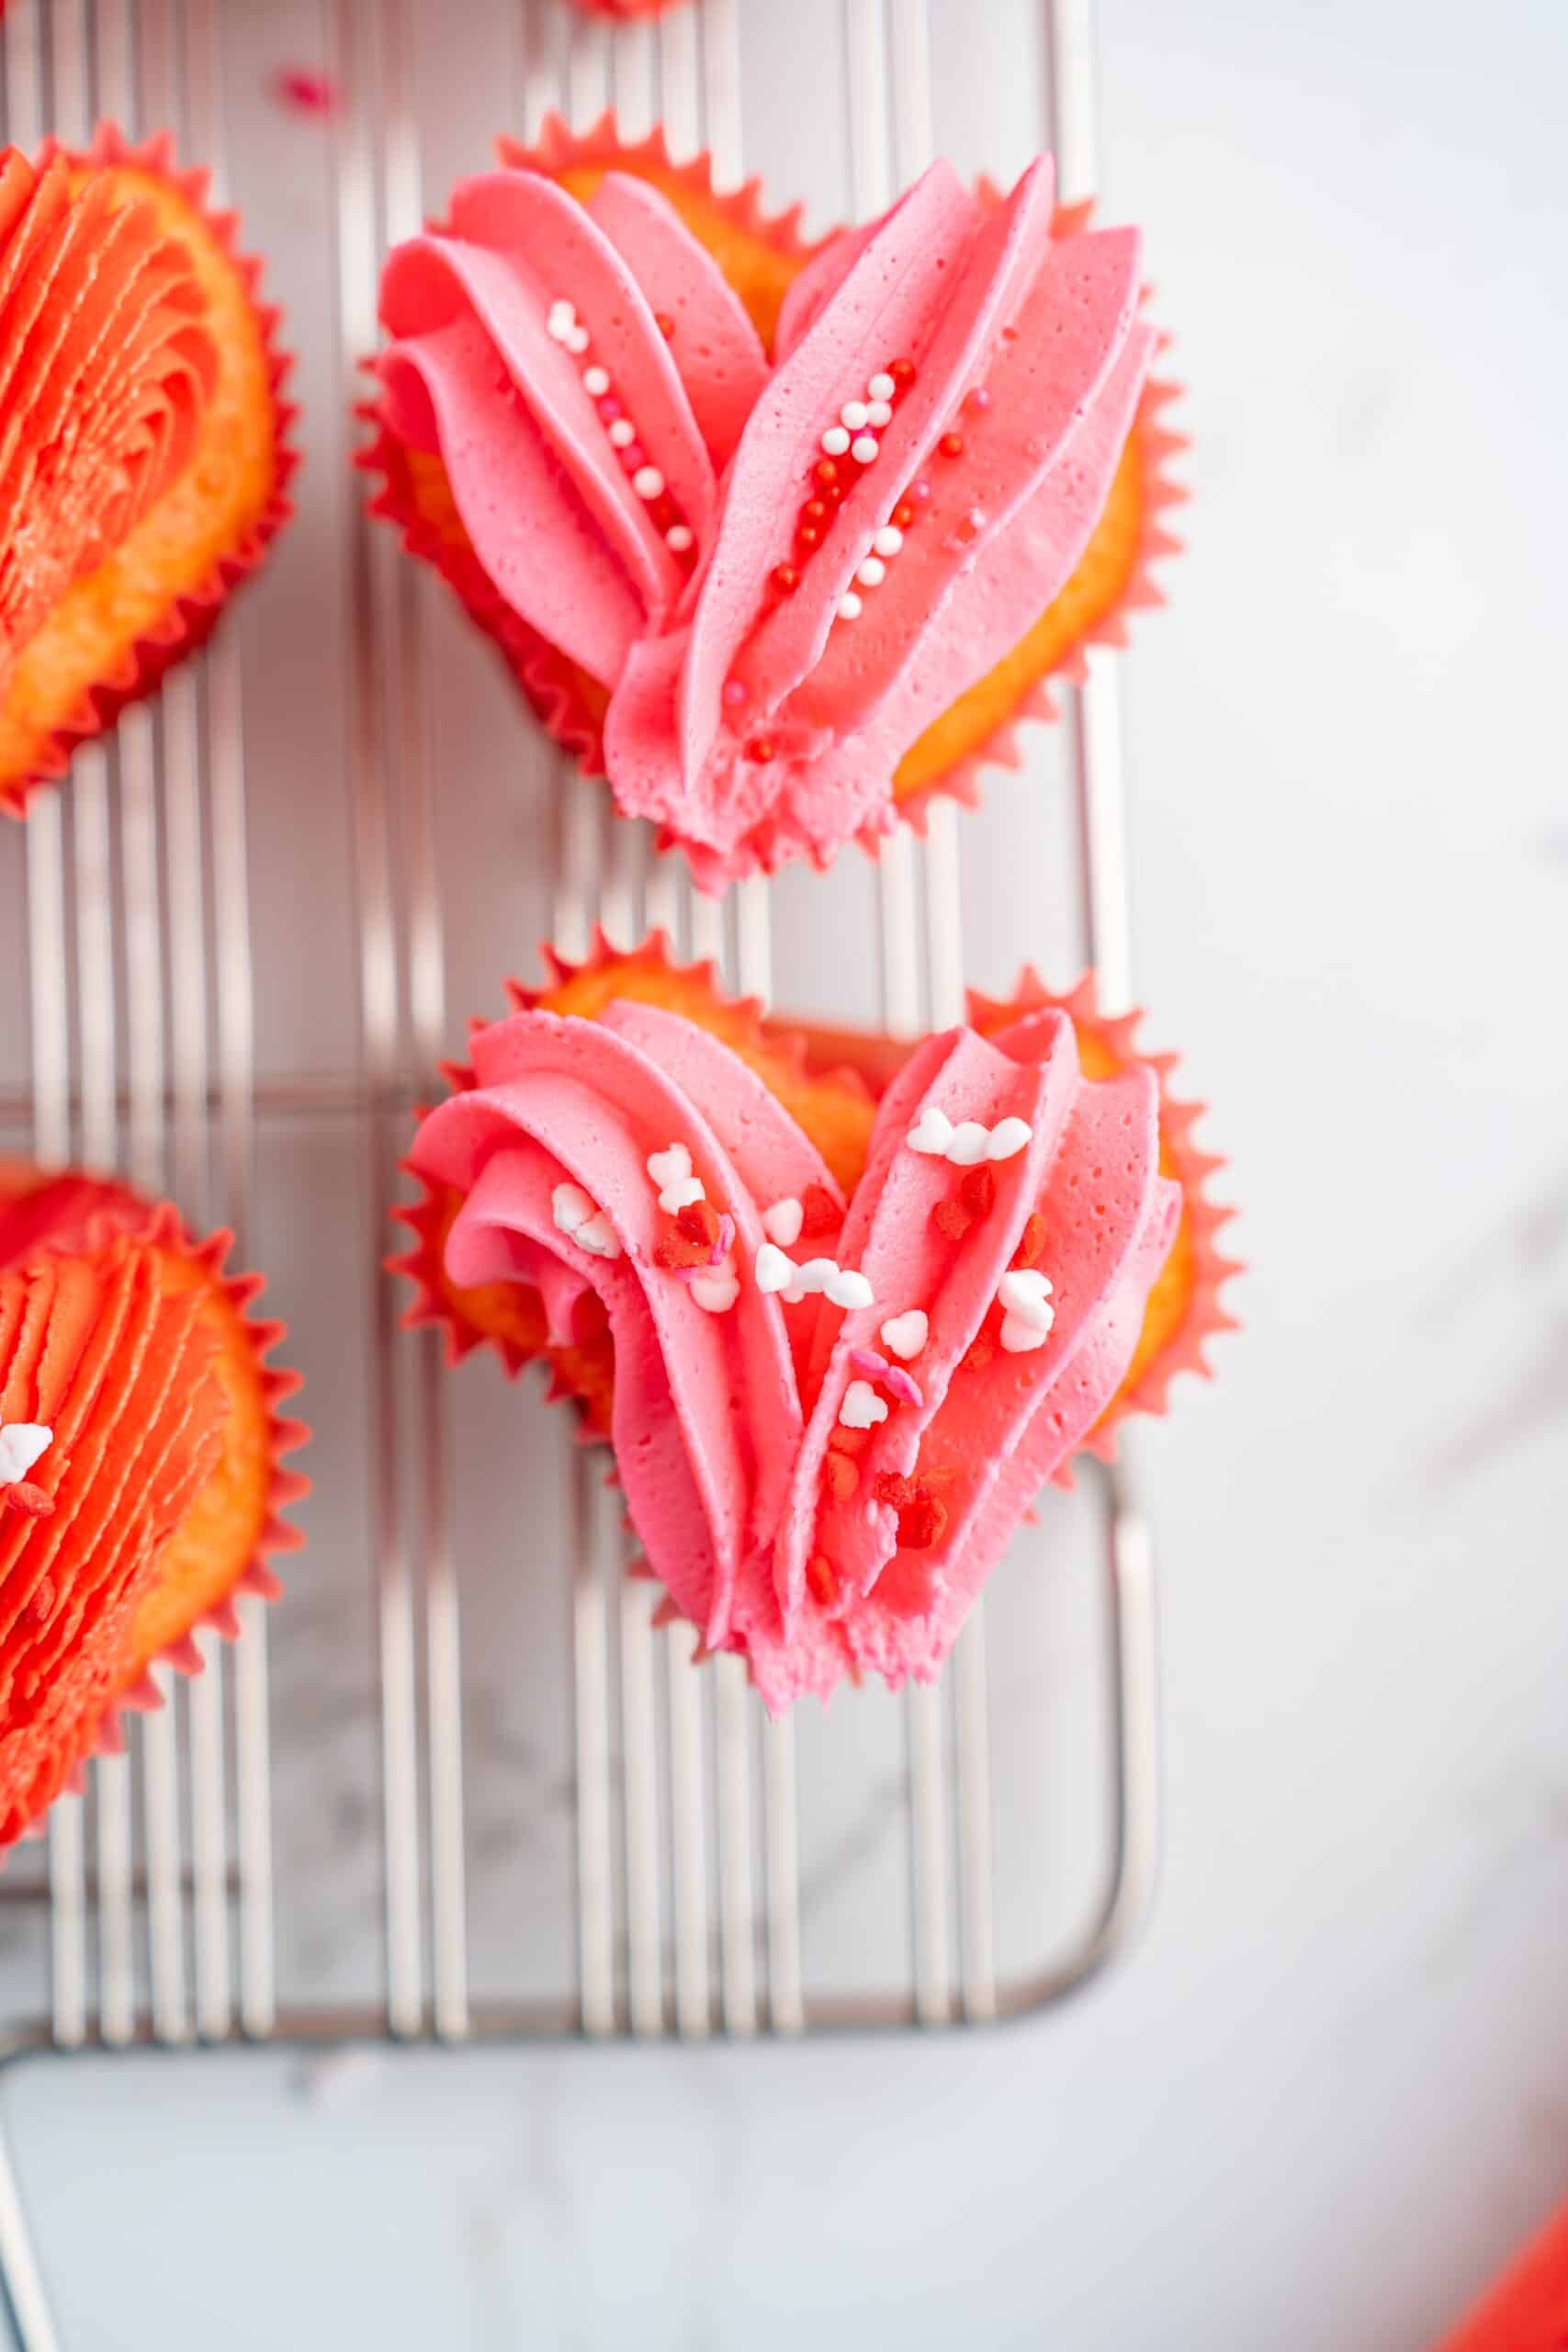 Valentine's Day cupcake decorations: heart shaped cupcakes